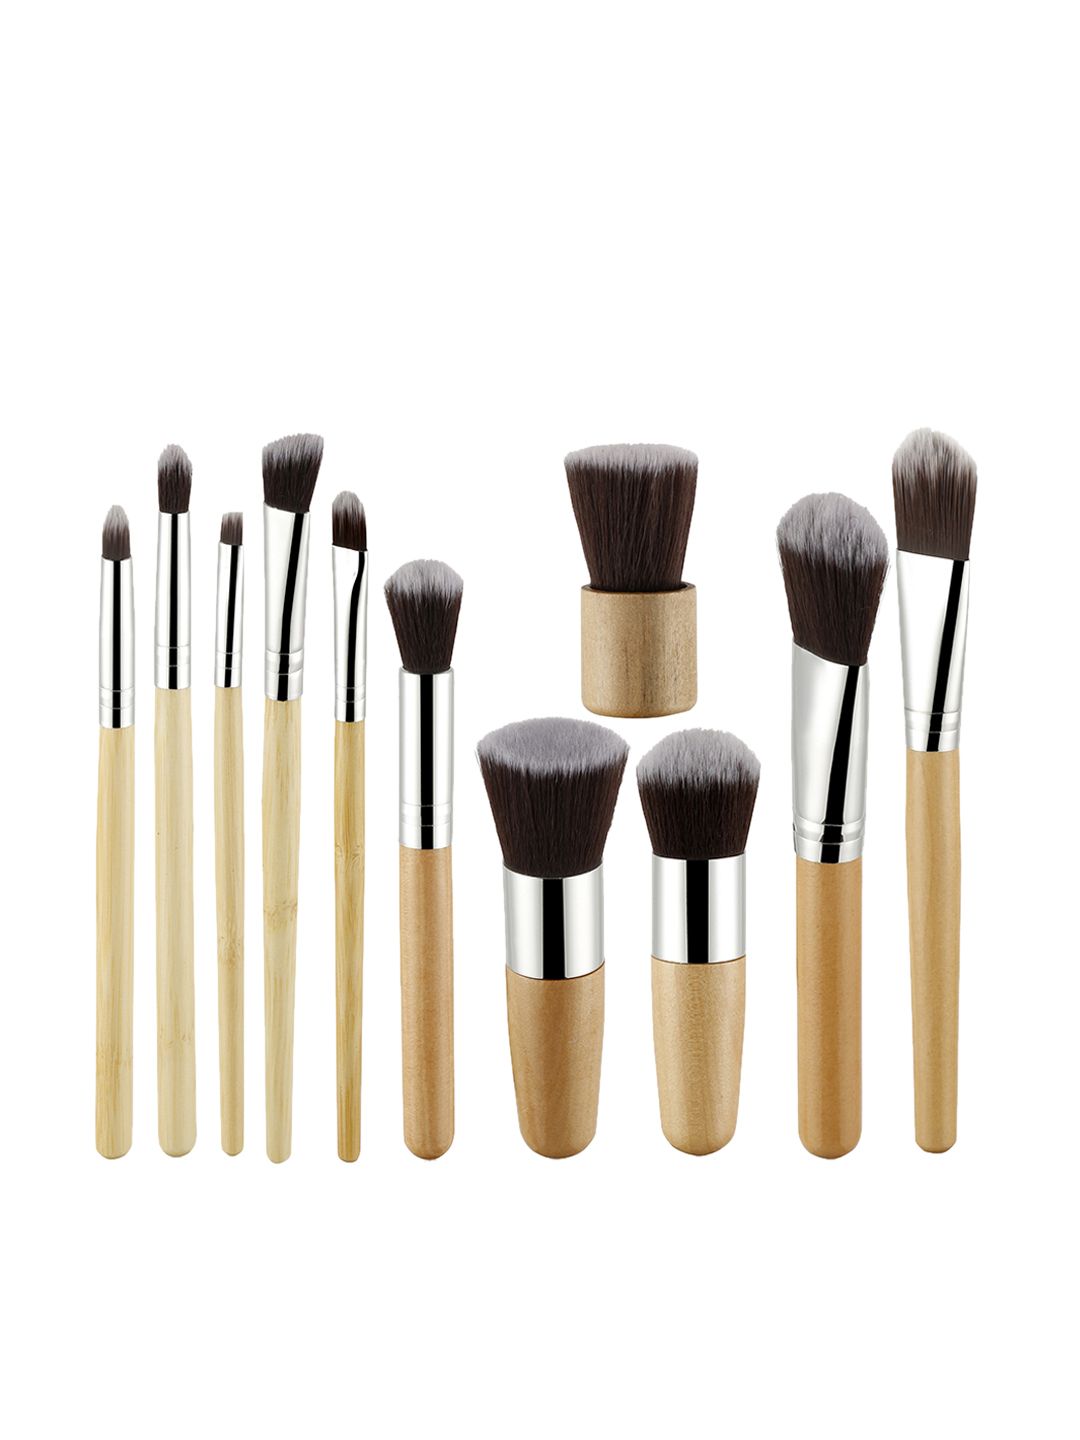 Foolzy Makeup Brushes - Set of 11 - Beige Price in India